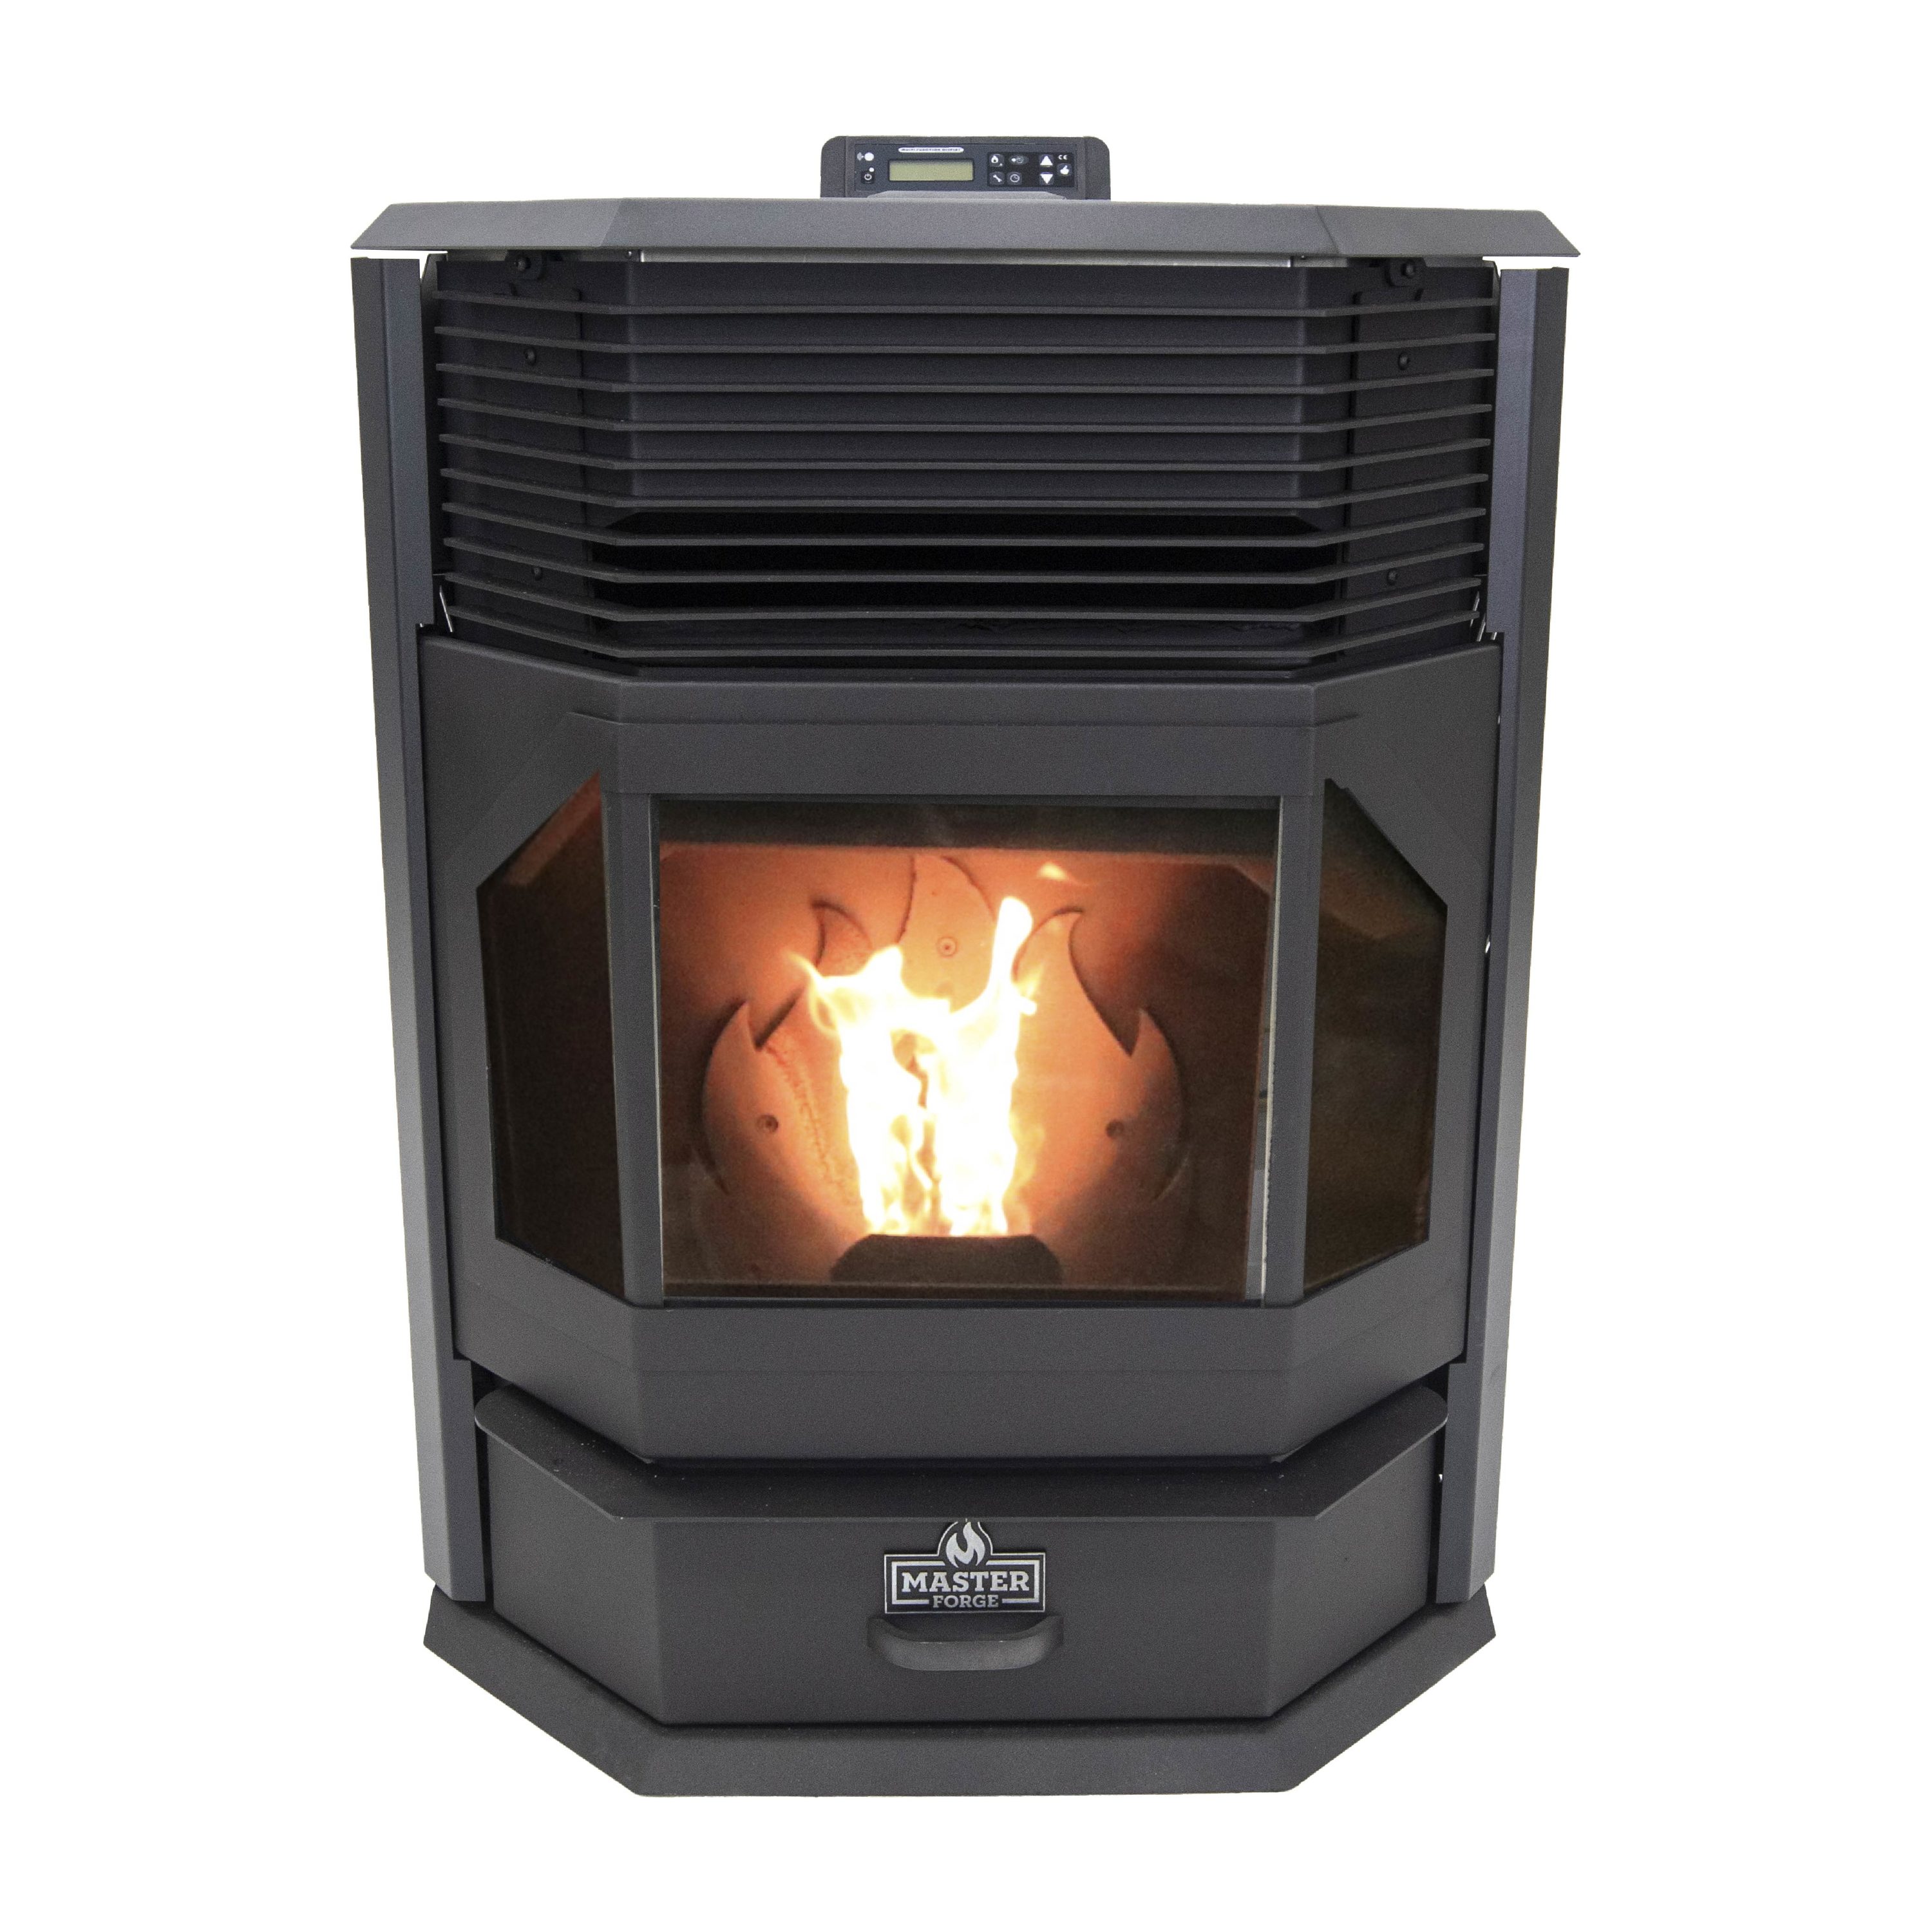 Master Forge 2500-sq ft Pellet Stove with 80-lb Hopper in the Pellet